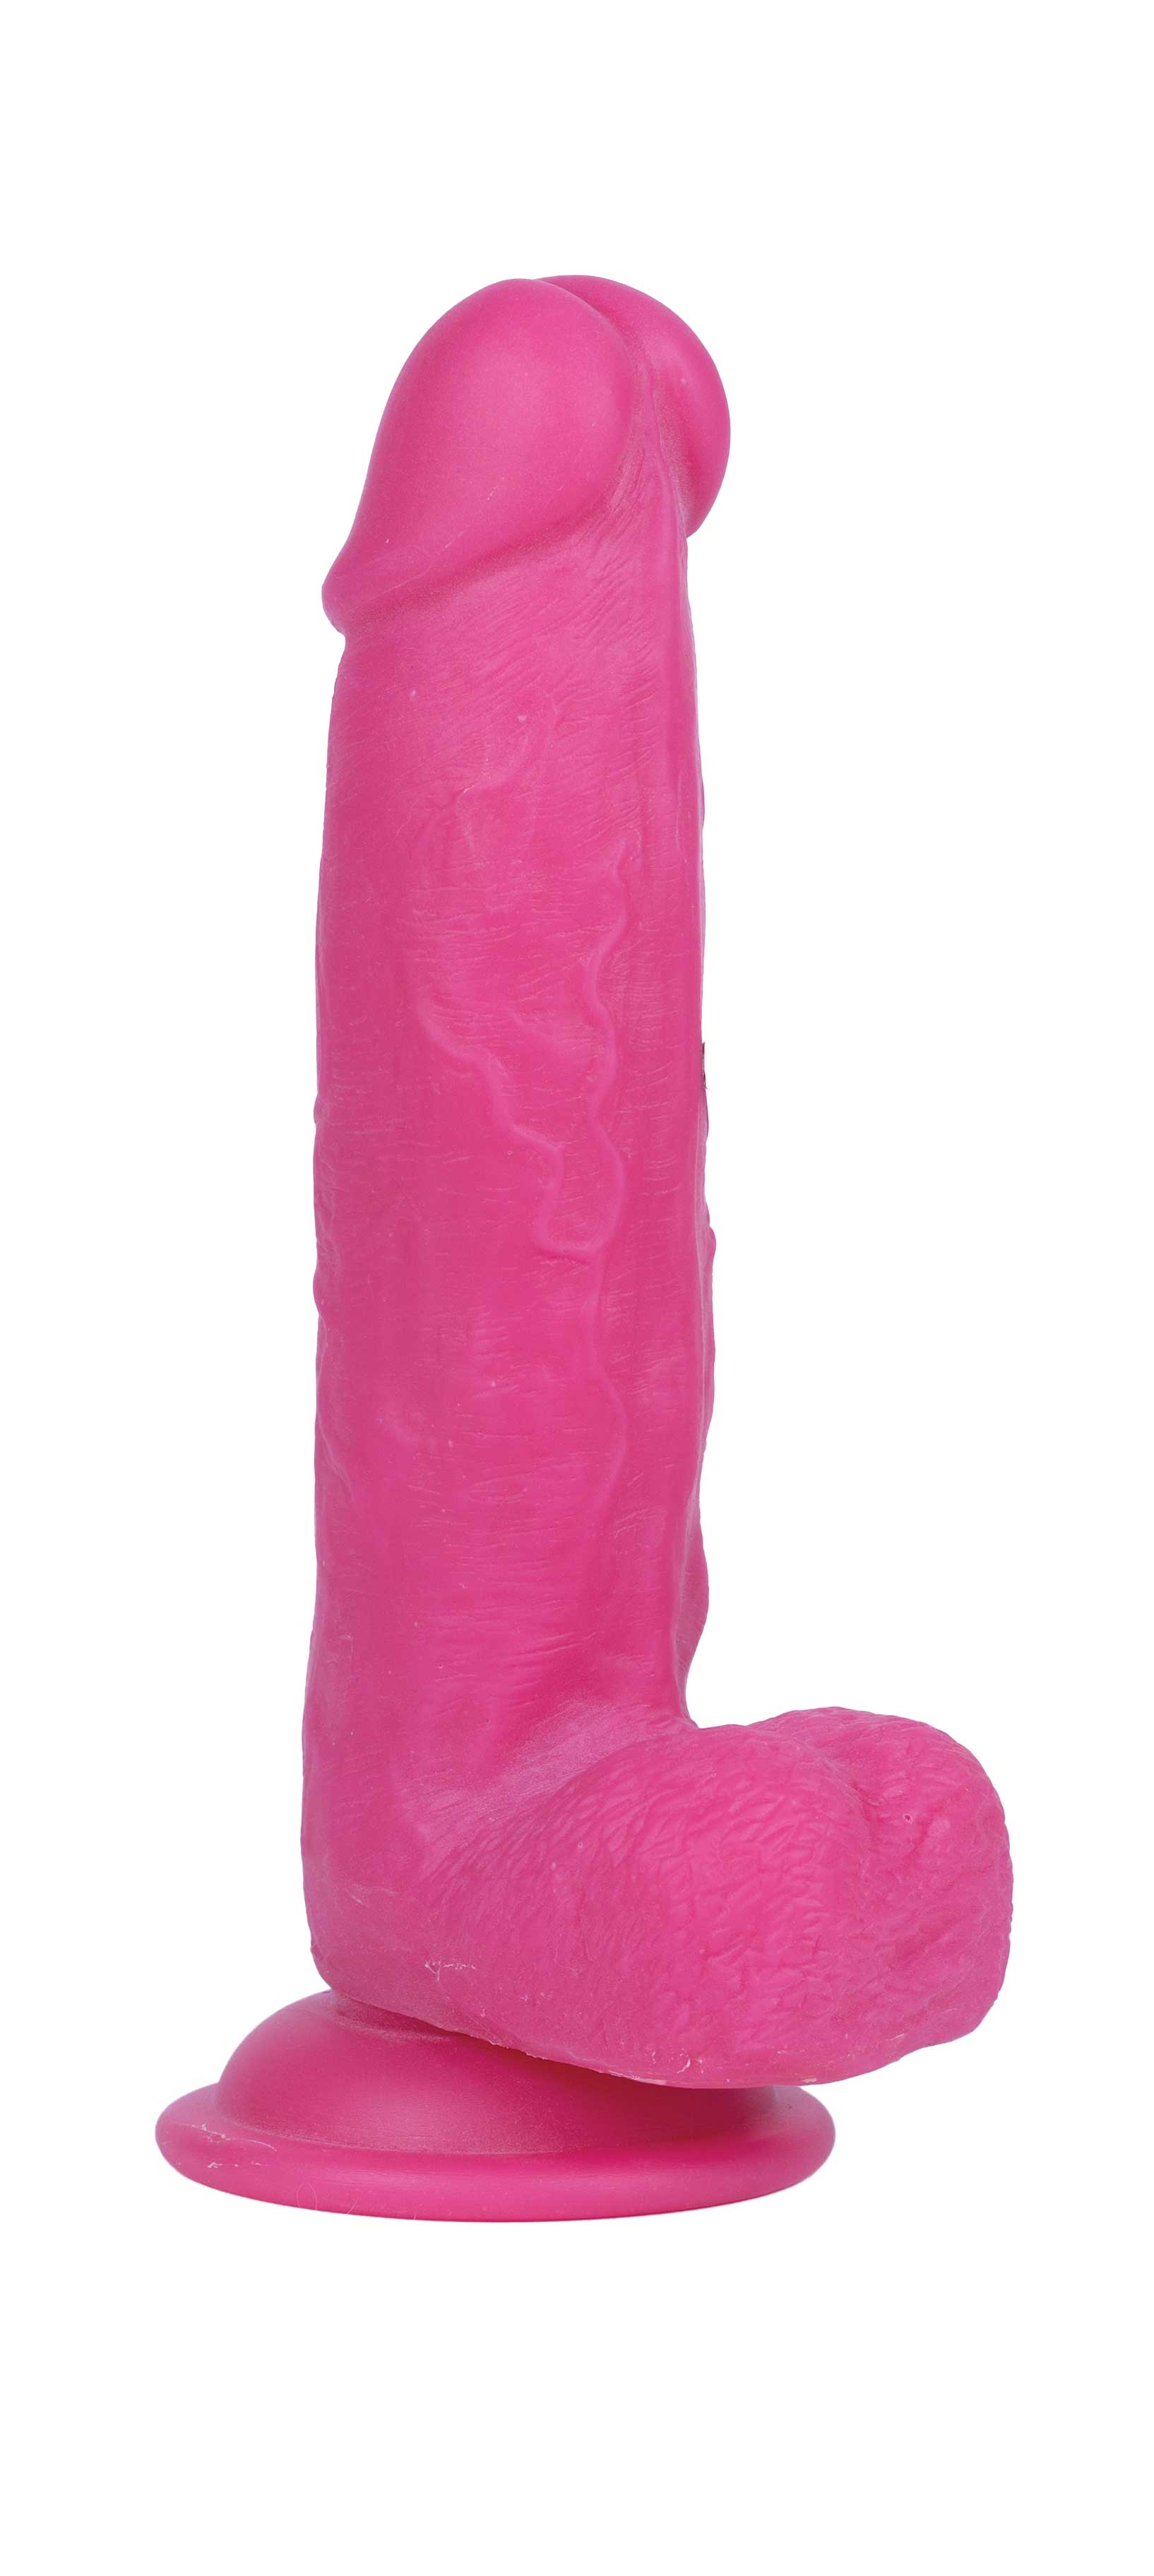 Get Lucky Ms. Pink 7.5 Inch Dildo - Pink-4